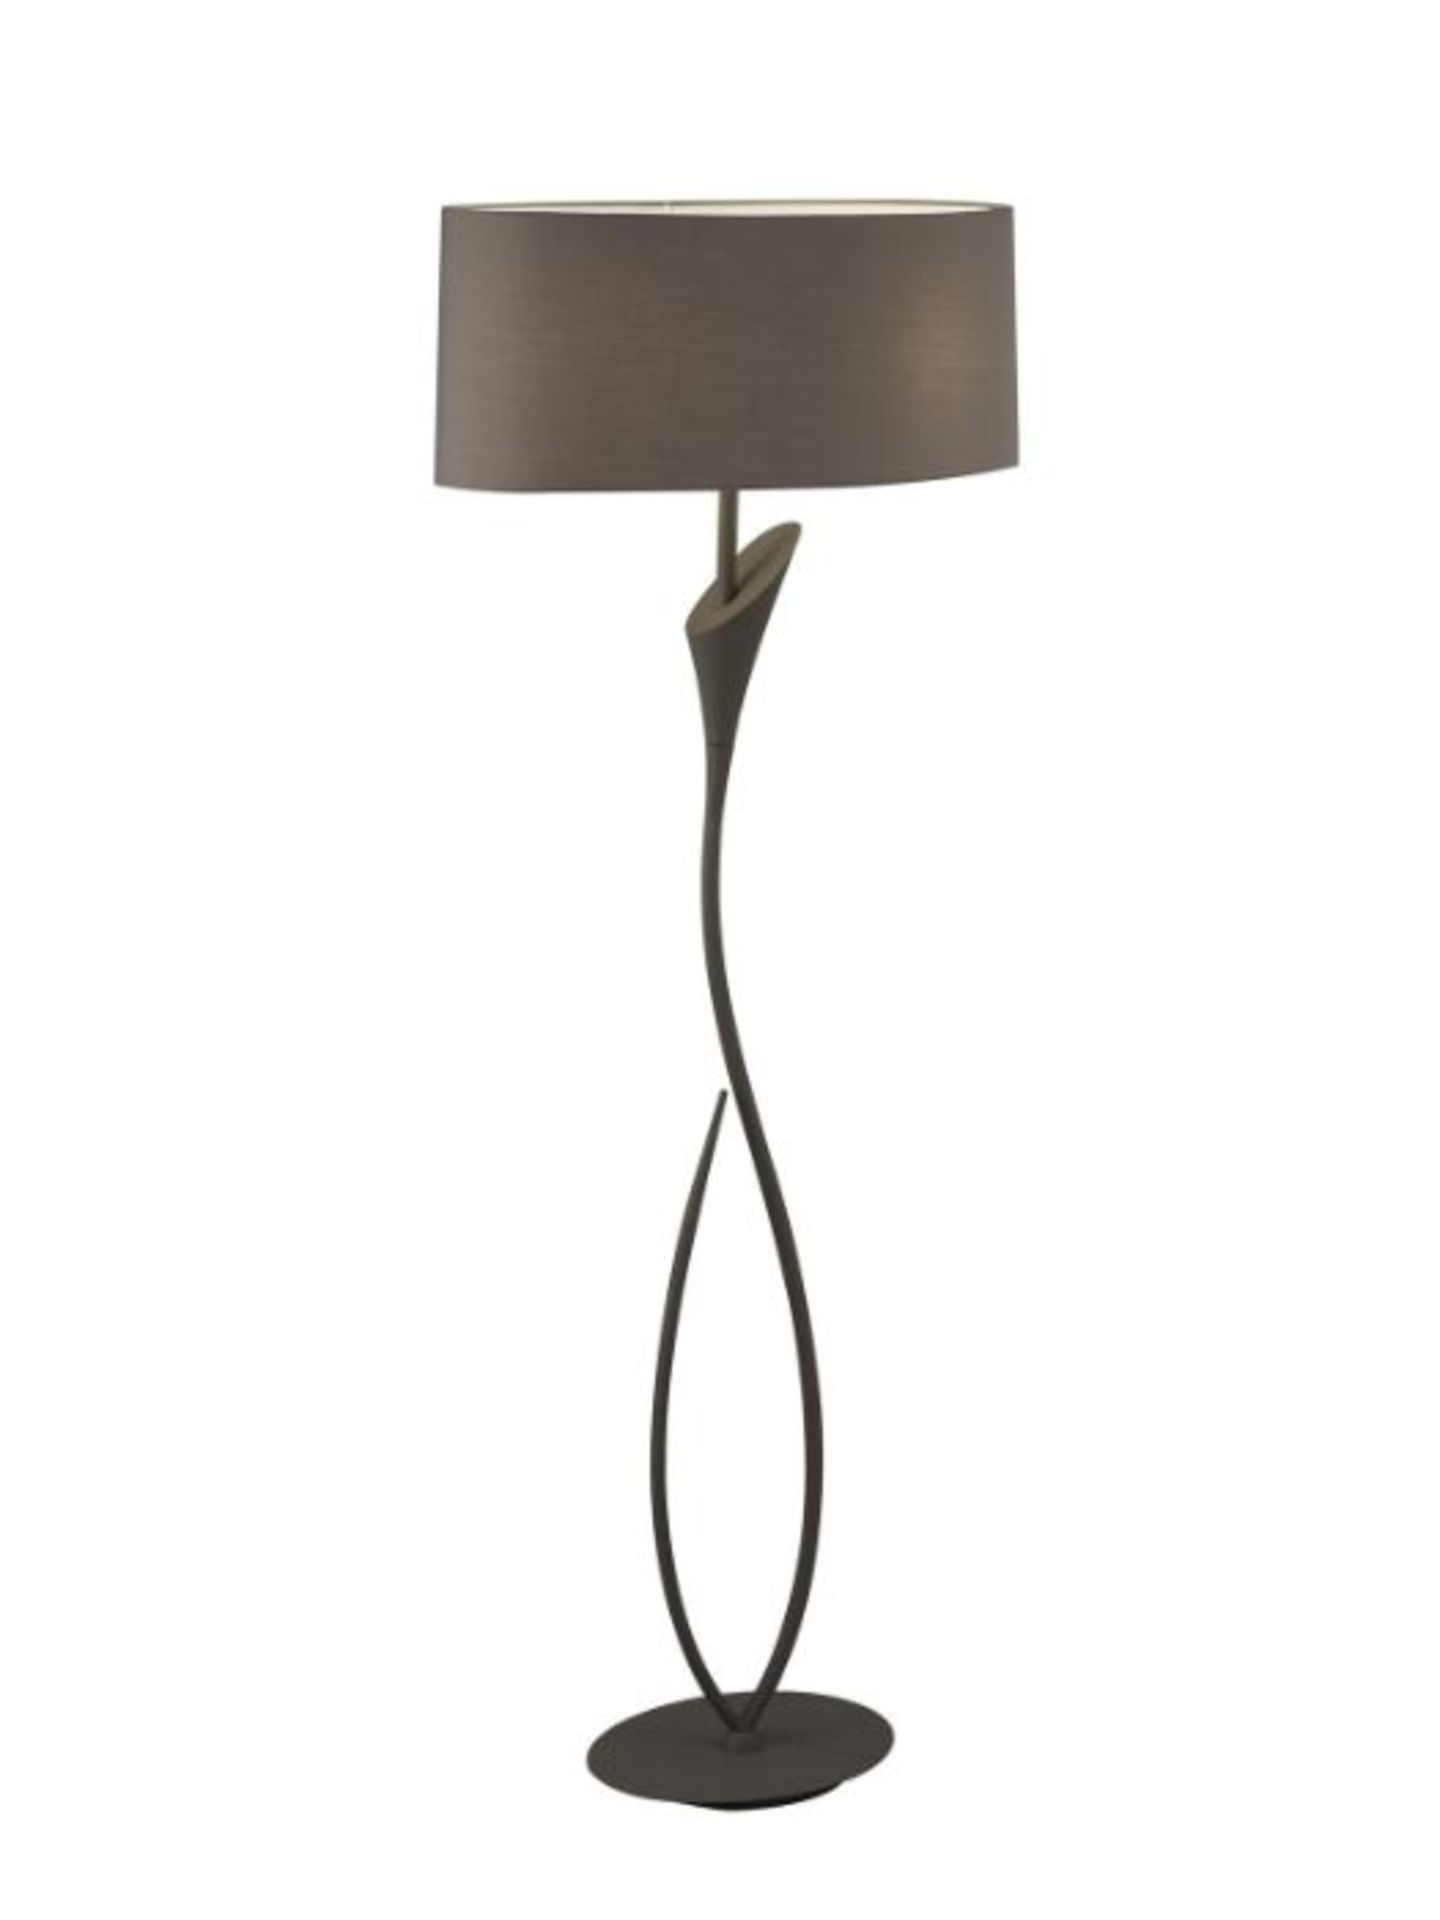 Ophelia & Co., Hartsfield 165cm Traditional Floor Lamp (BASE ONLY) (NO SHADE) - RRP £319.99 (